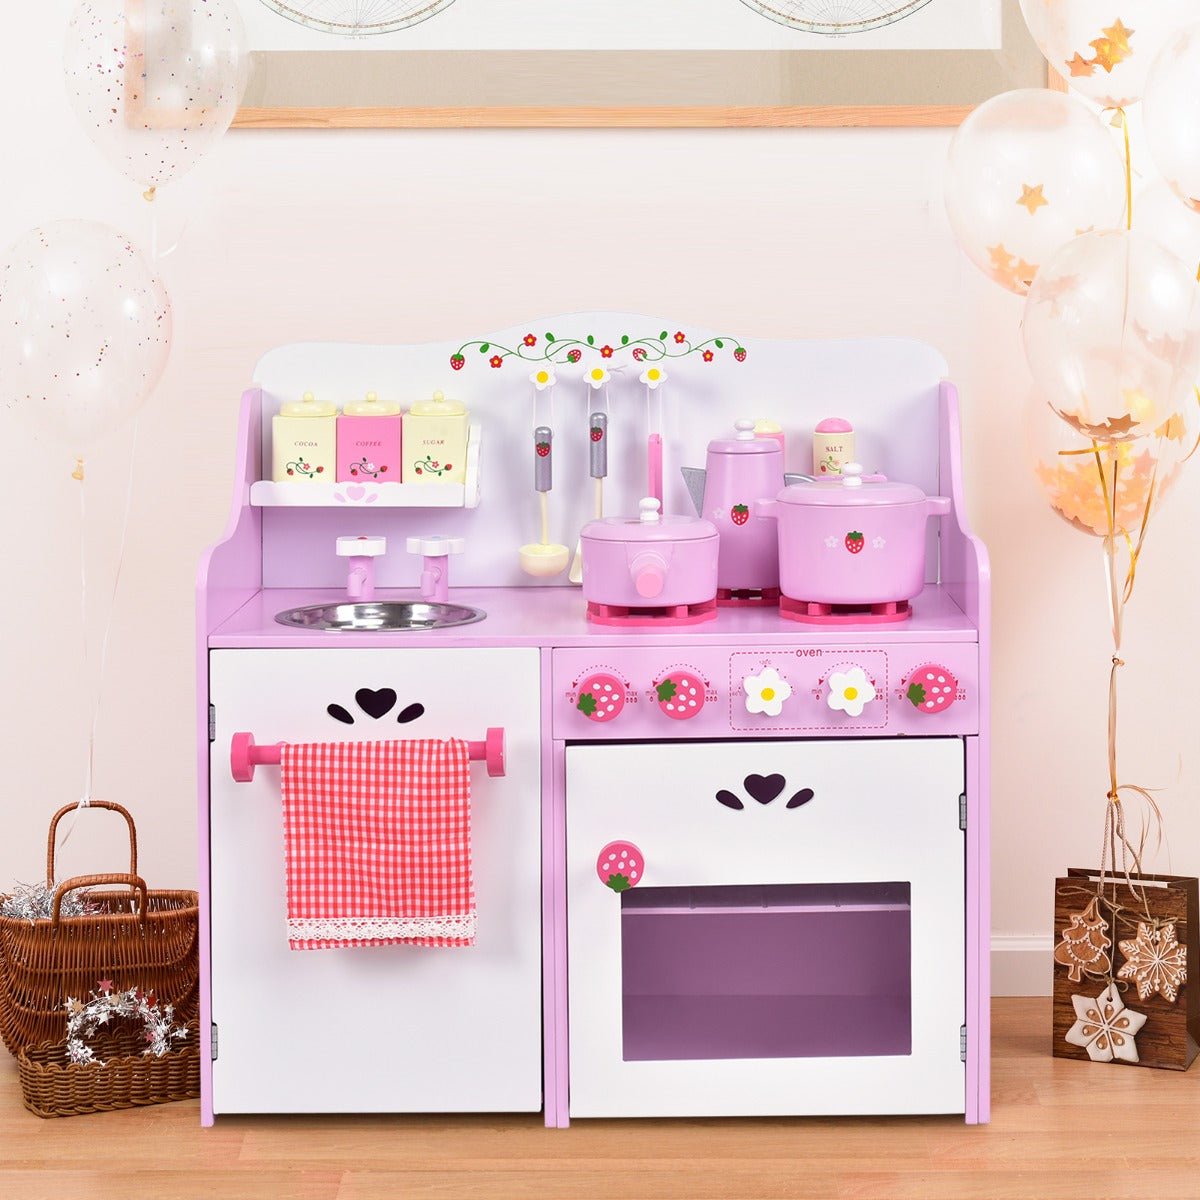 Get Cooking with a Strawberry Kids Kitchen in Australia